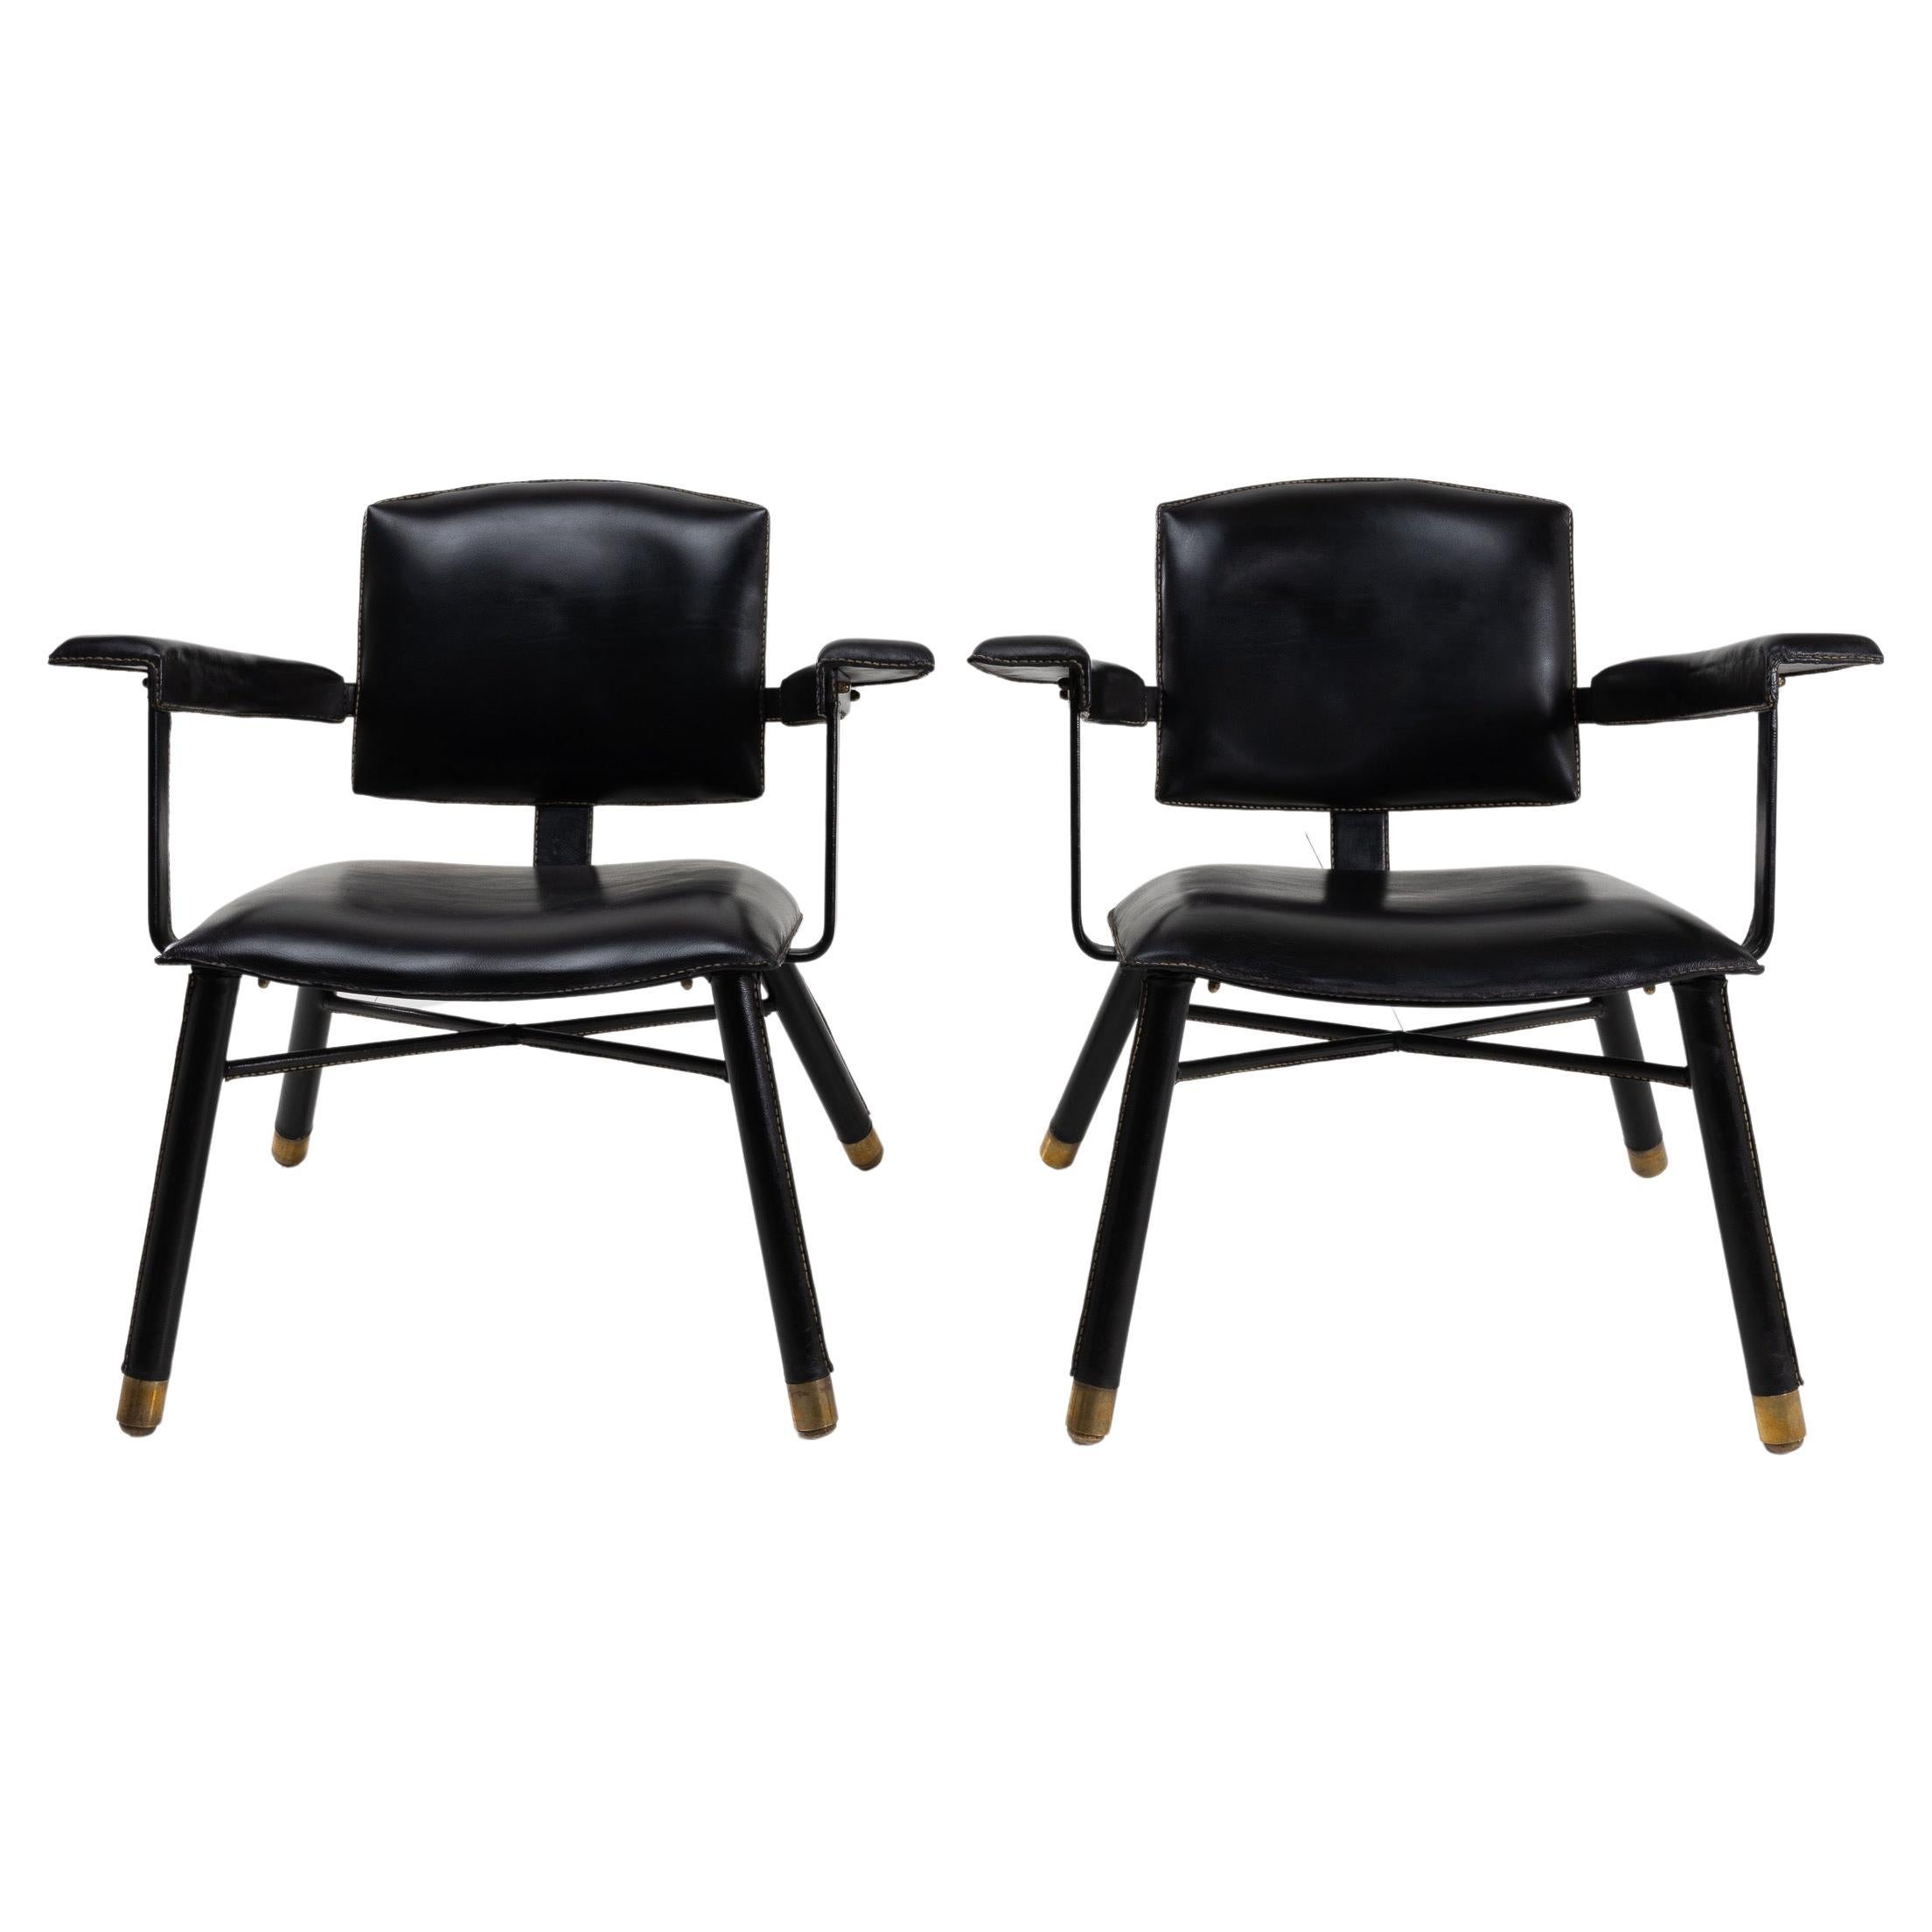 Pair of Black Leather Armchairs Called �“Chauffeuse” by Jacques Adnet